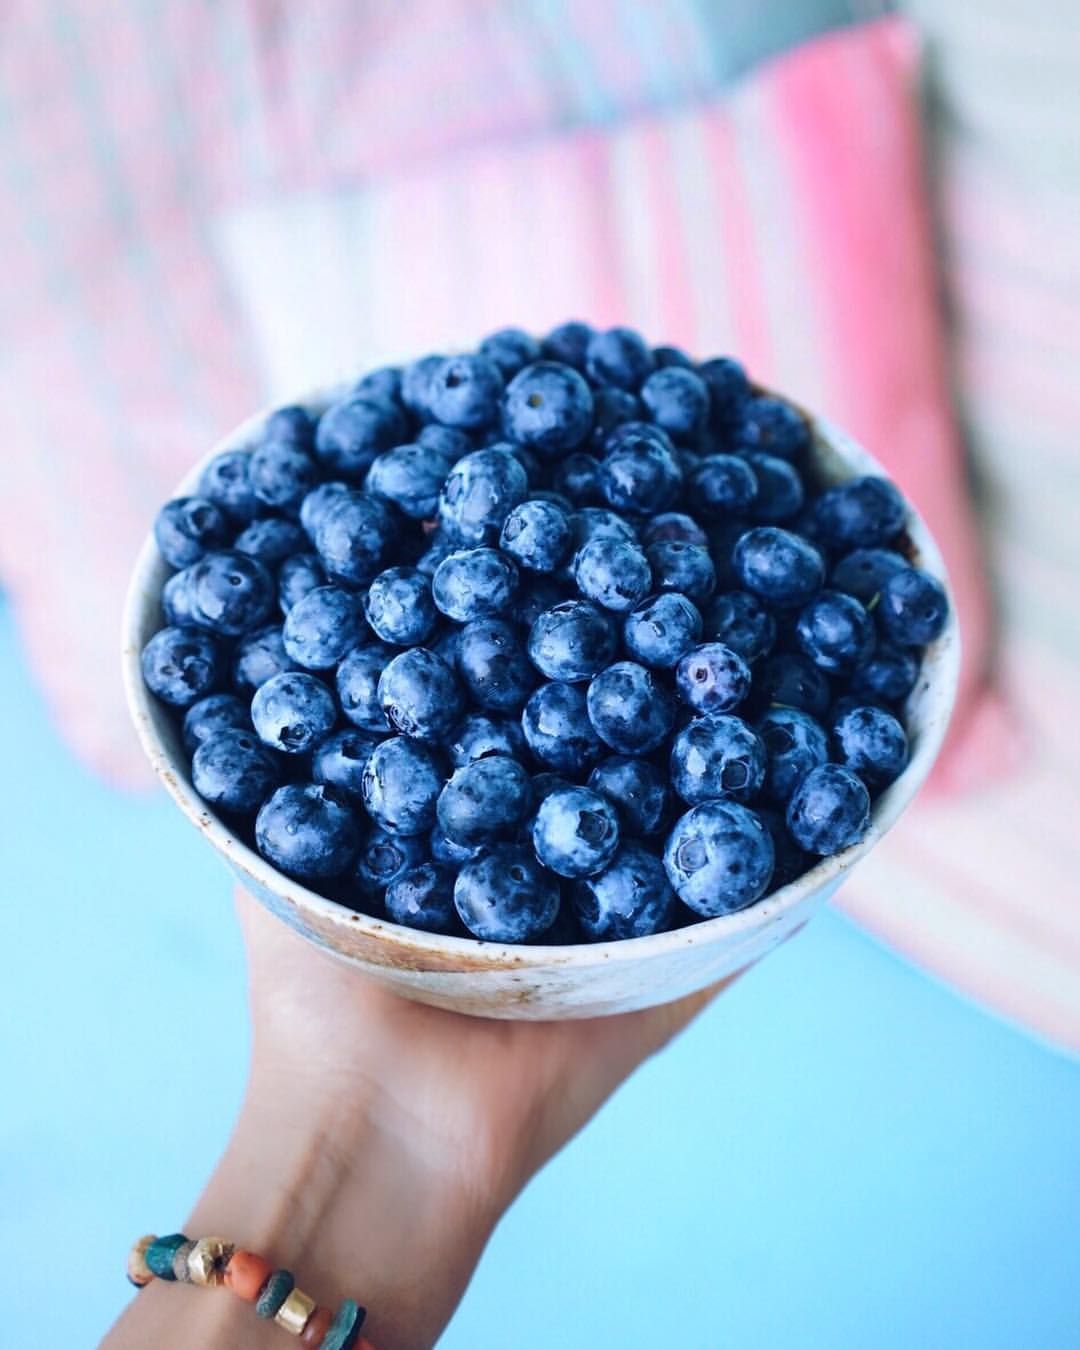 Raw Is The Best Way To Eat Blueberries